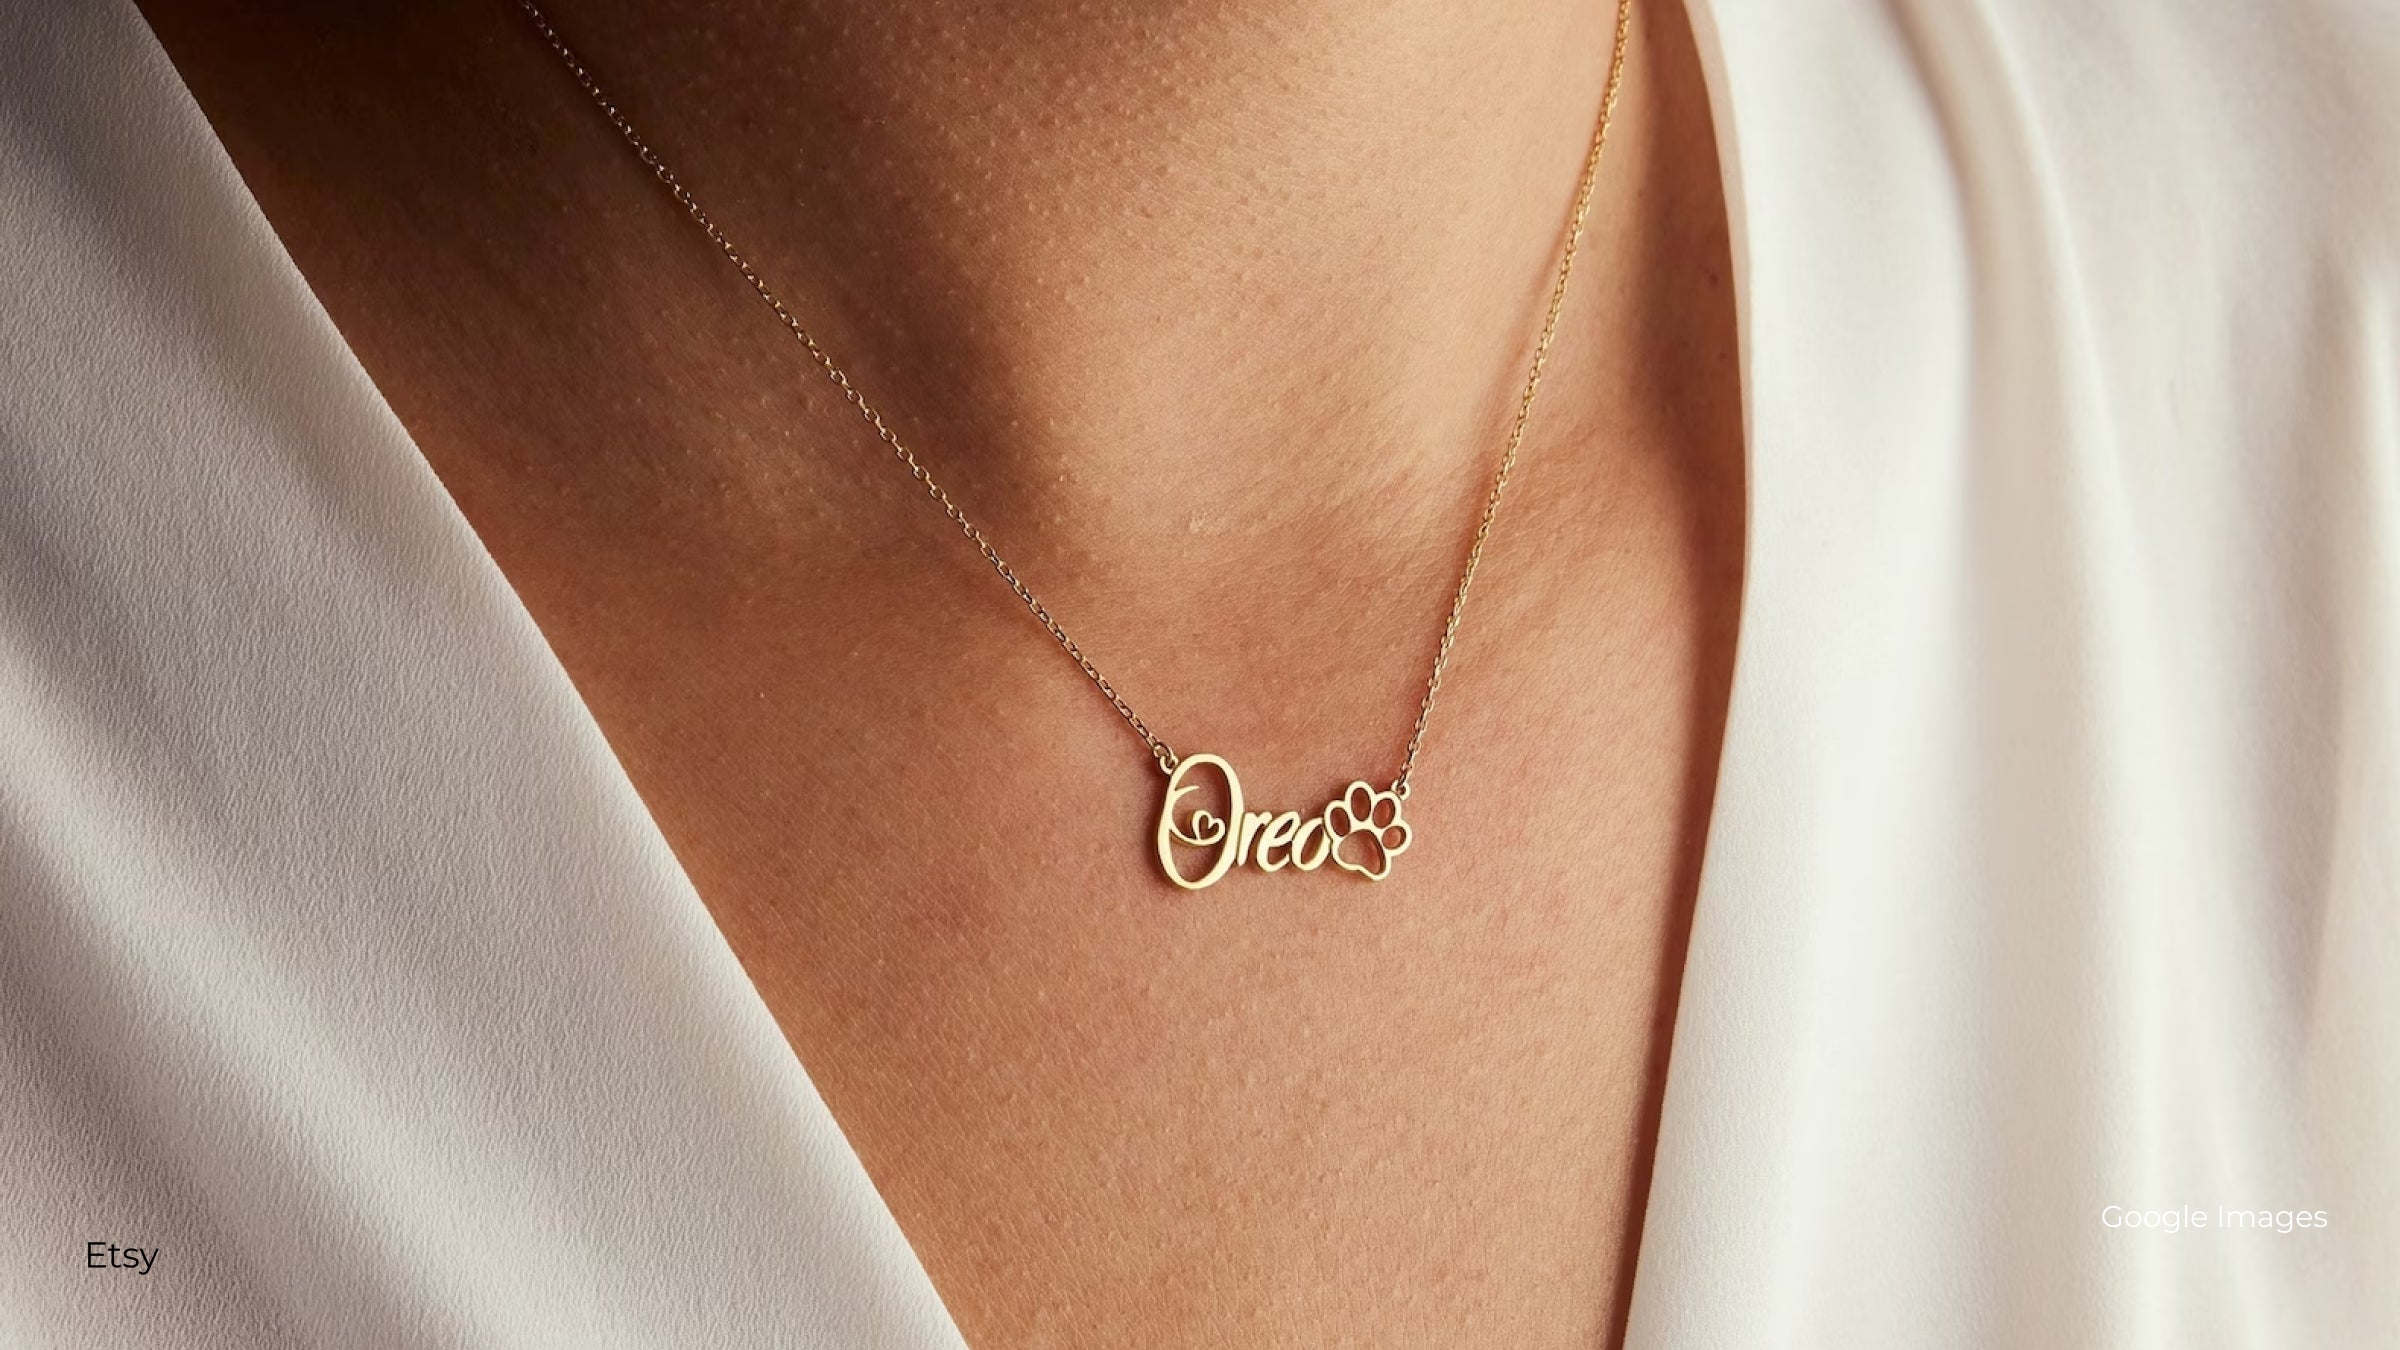 A person in an ivory blouse wearing a gold necklace with the name Oreo